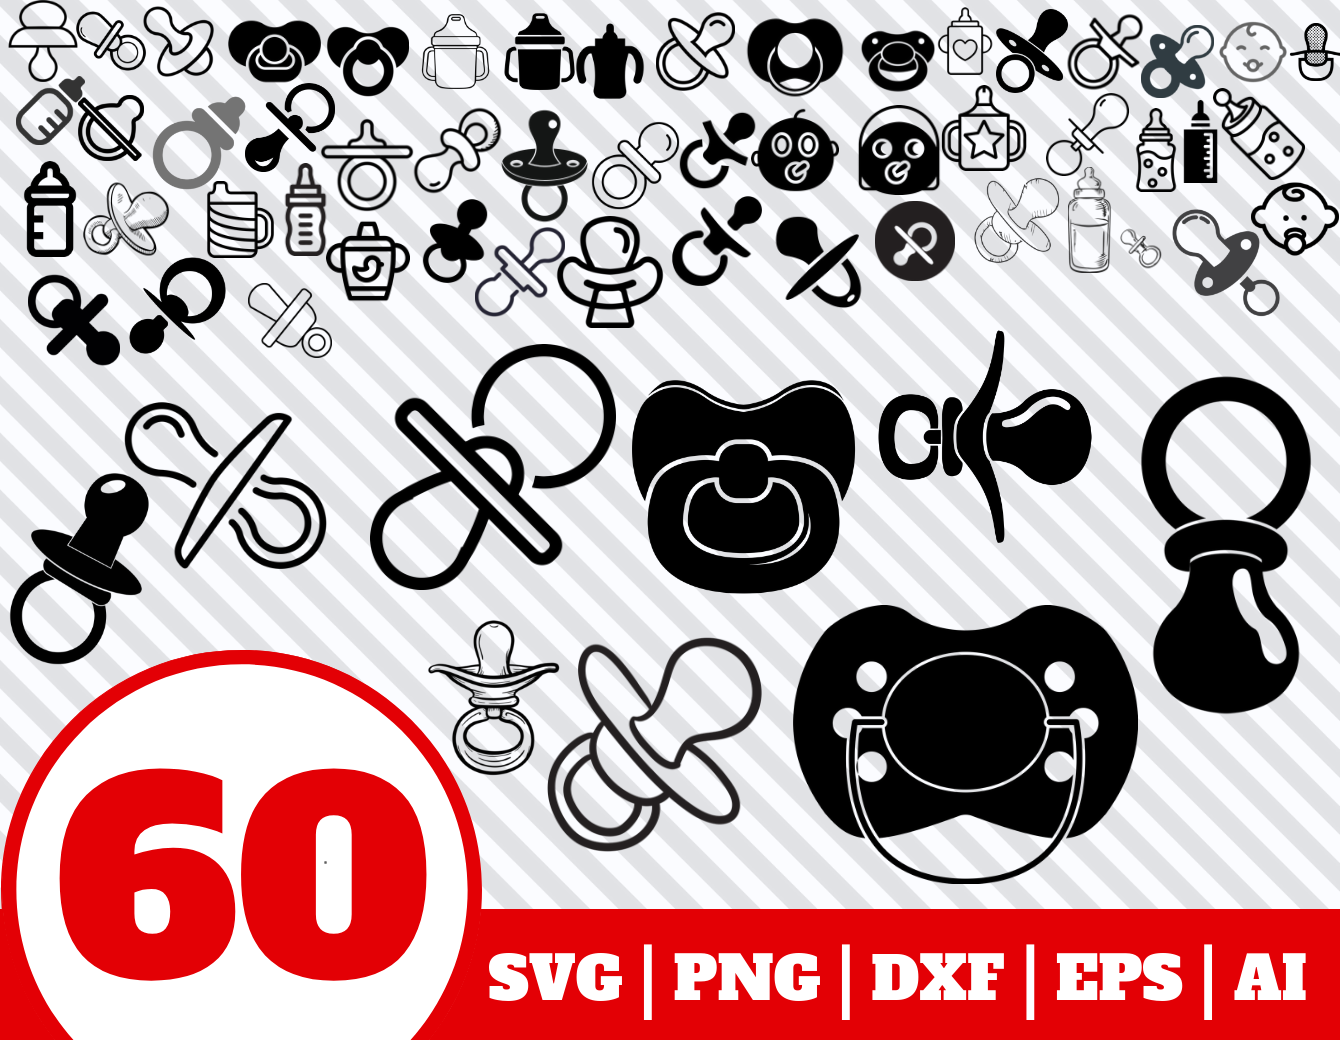 Download 60 BABY PACIFIER SVG - baby pacifier clipart - baby shower ...